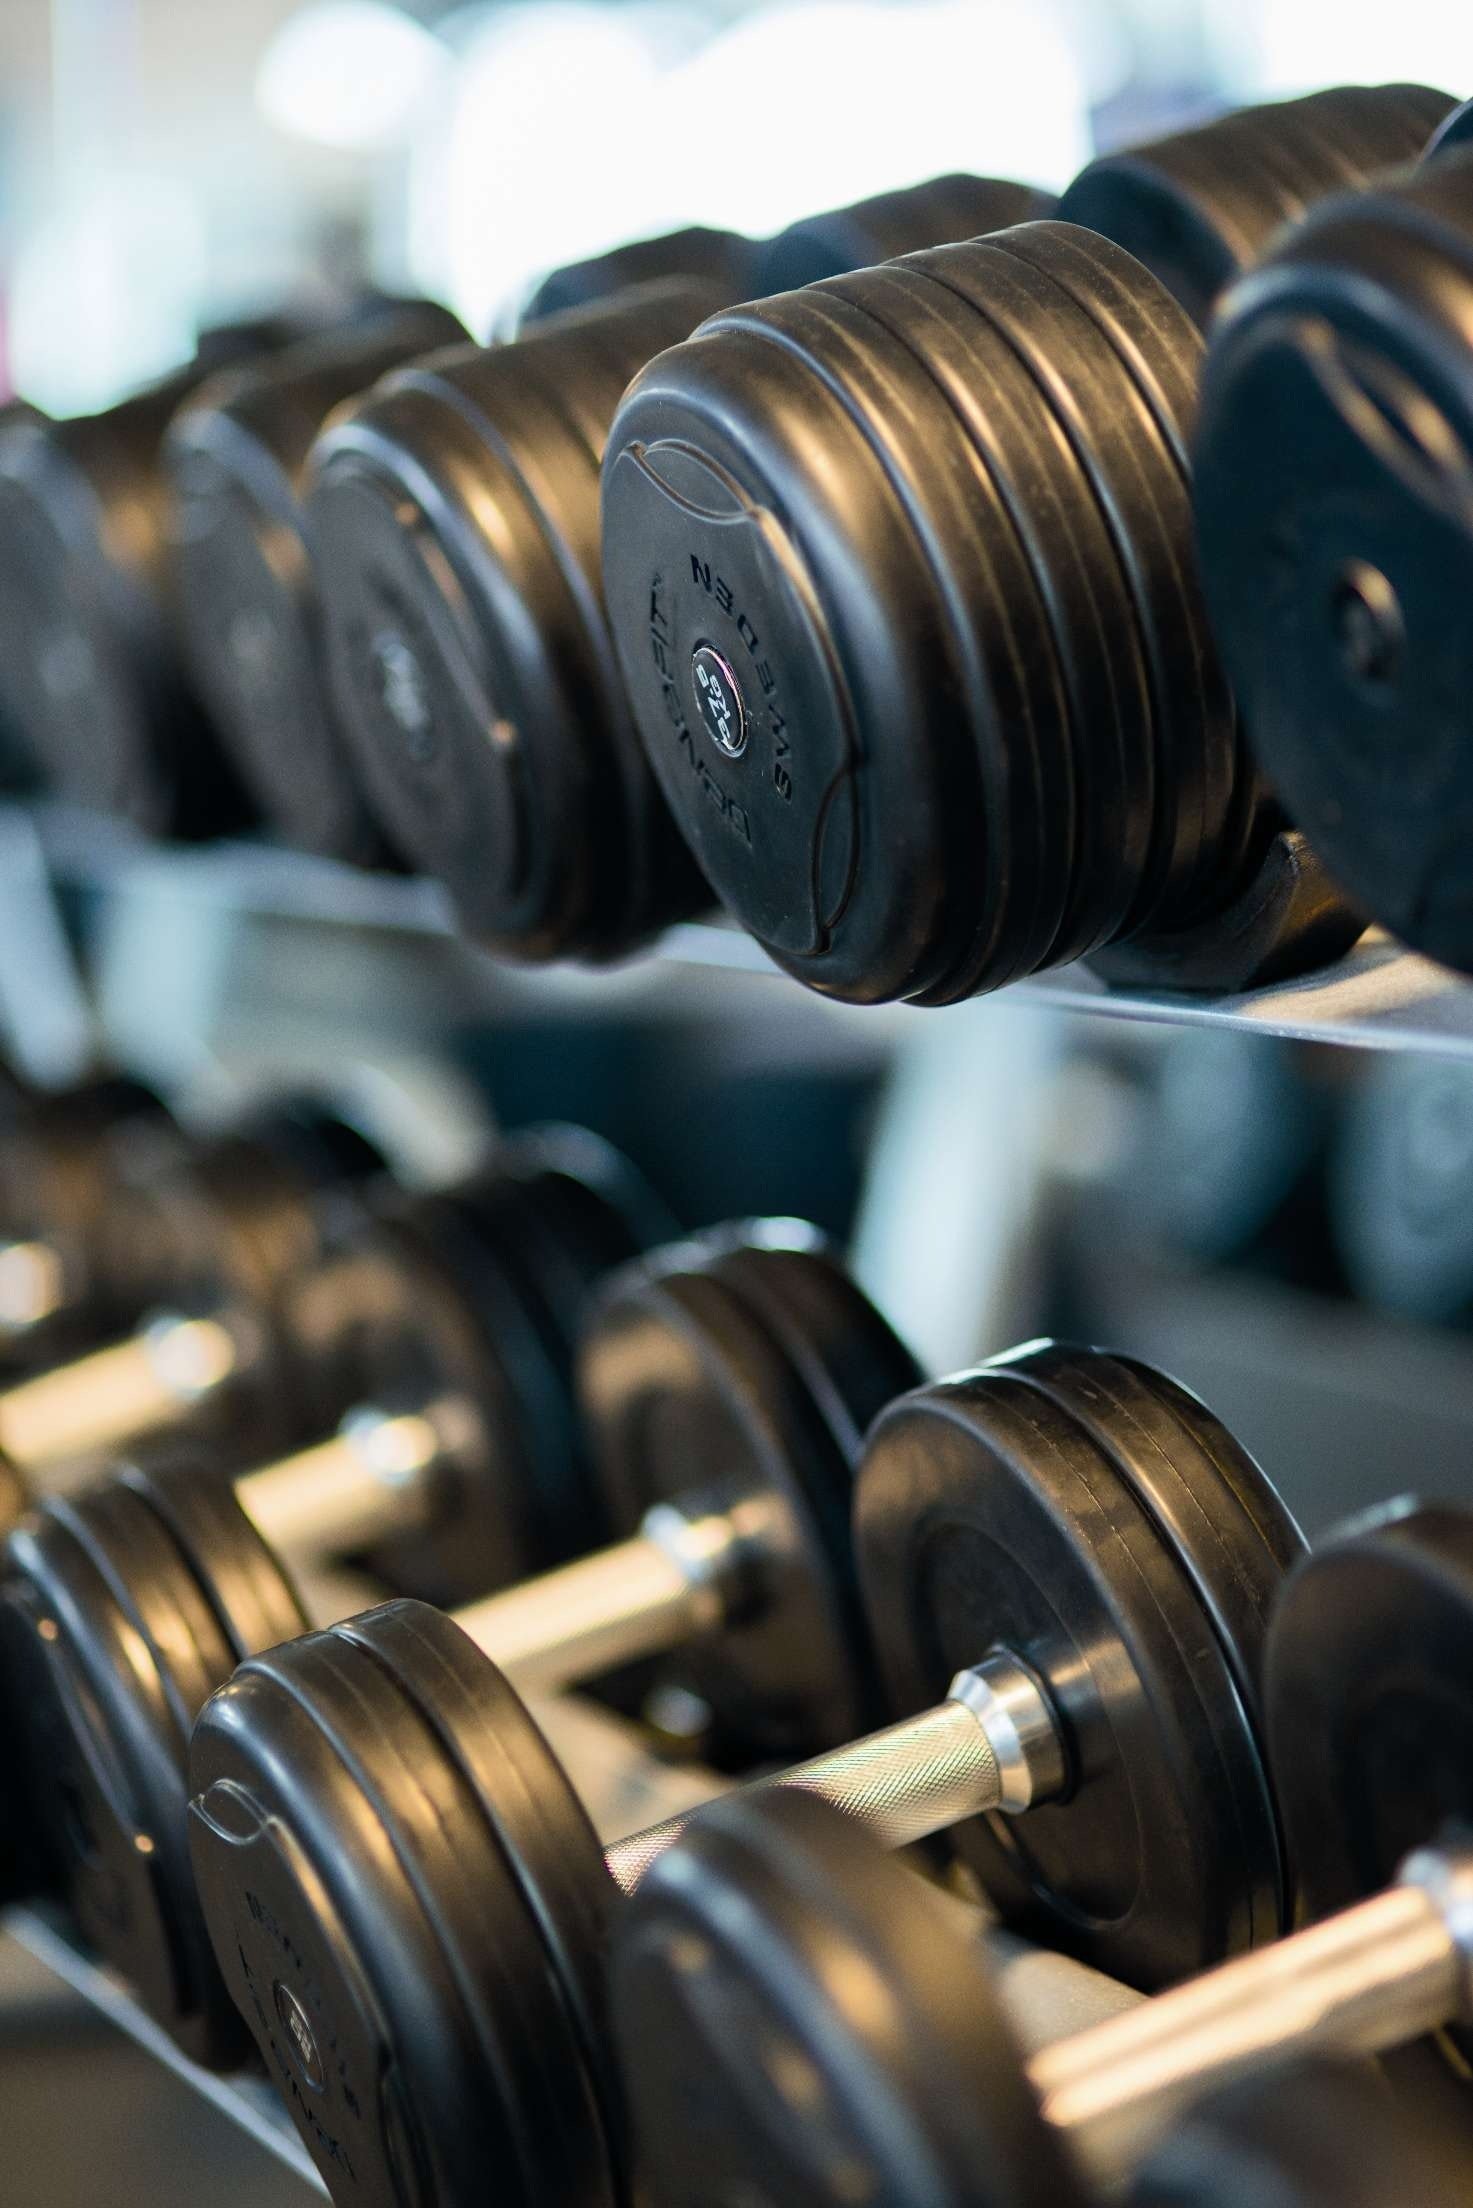 He picked up a pair of 30kg dumbbells and started working out. | Source: Pexels